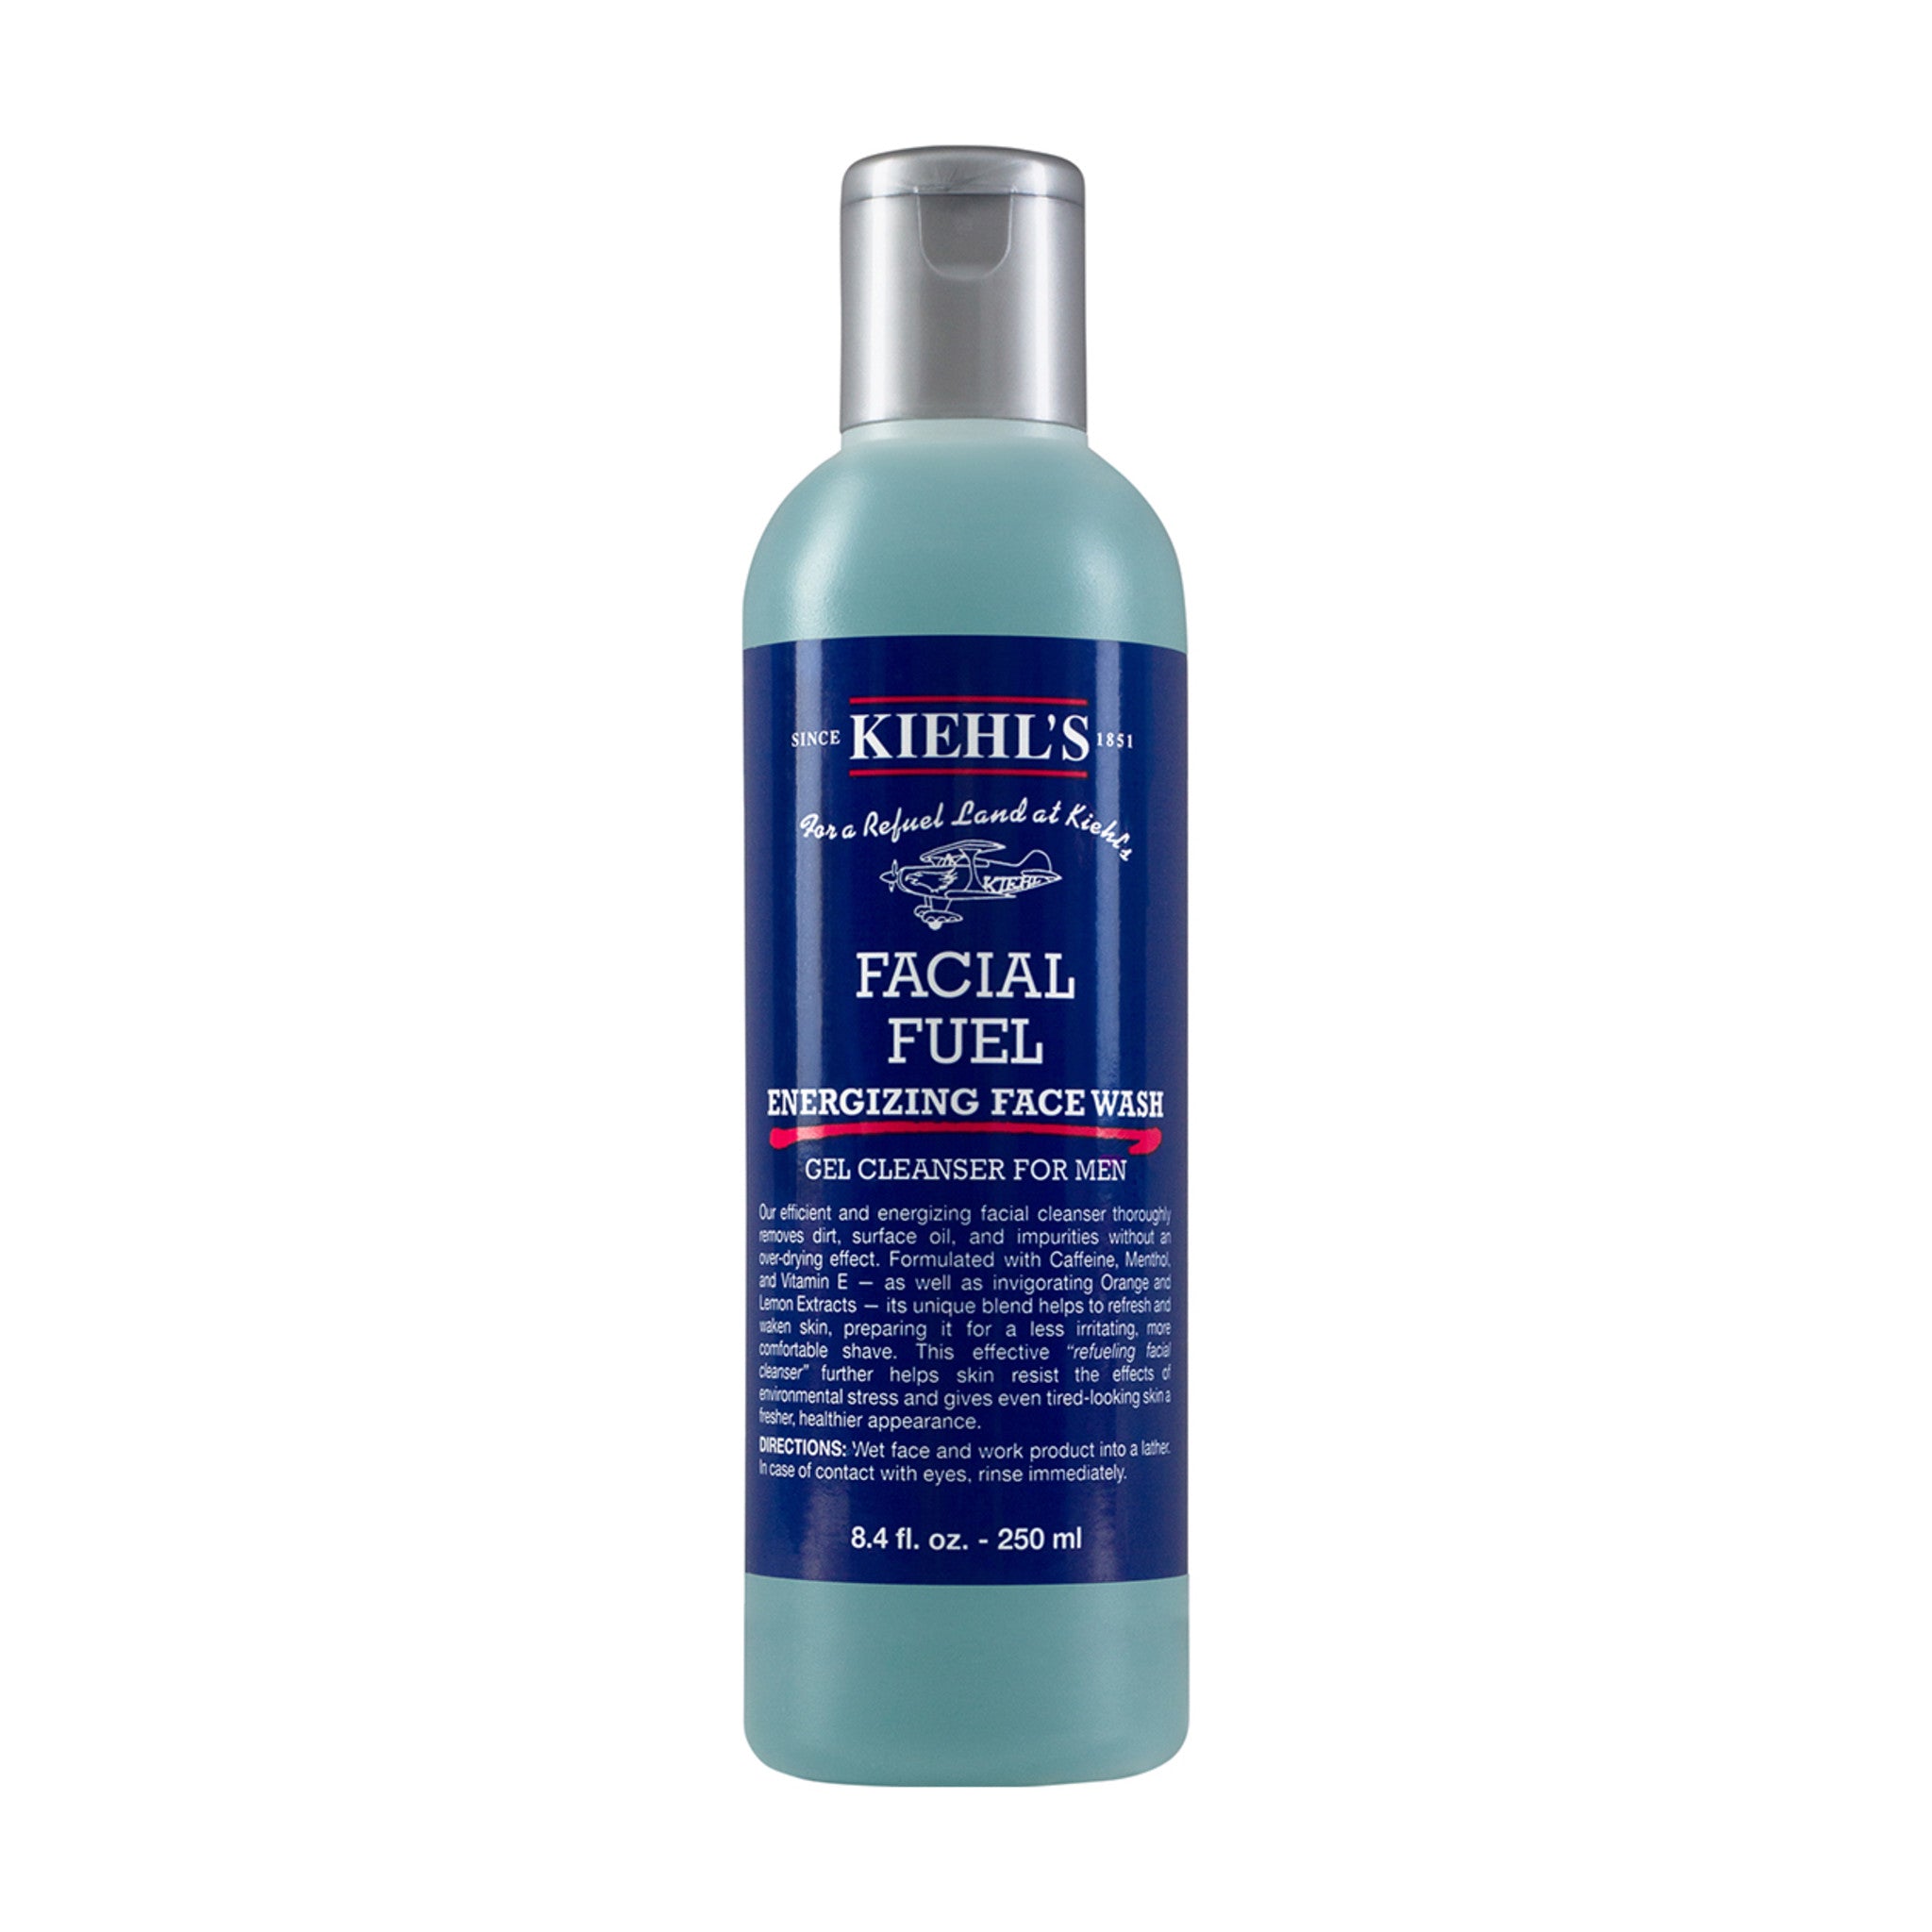 Kiehl's Since 1851 Facial Fuel Energizing Face Wash Size variant: 8 oz. main image.